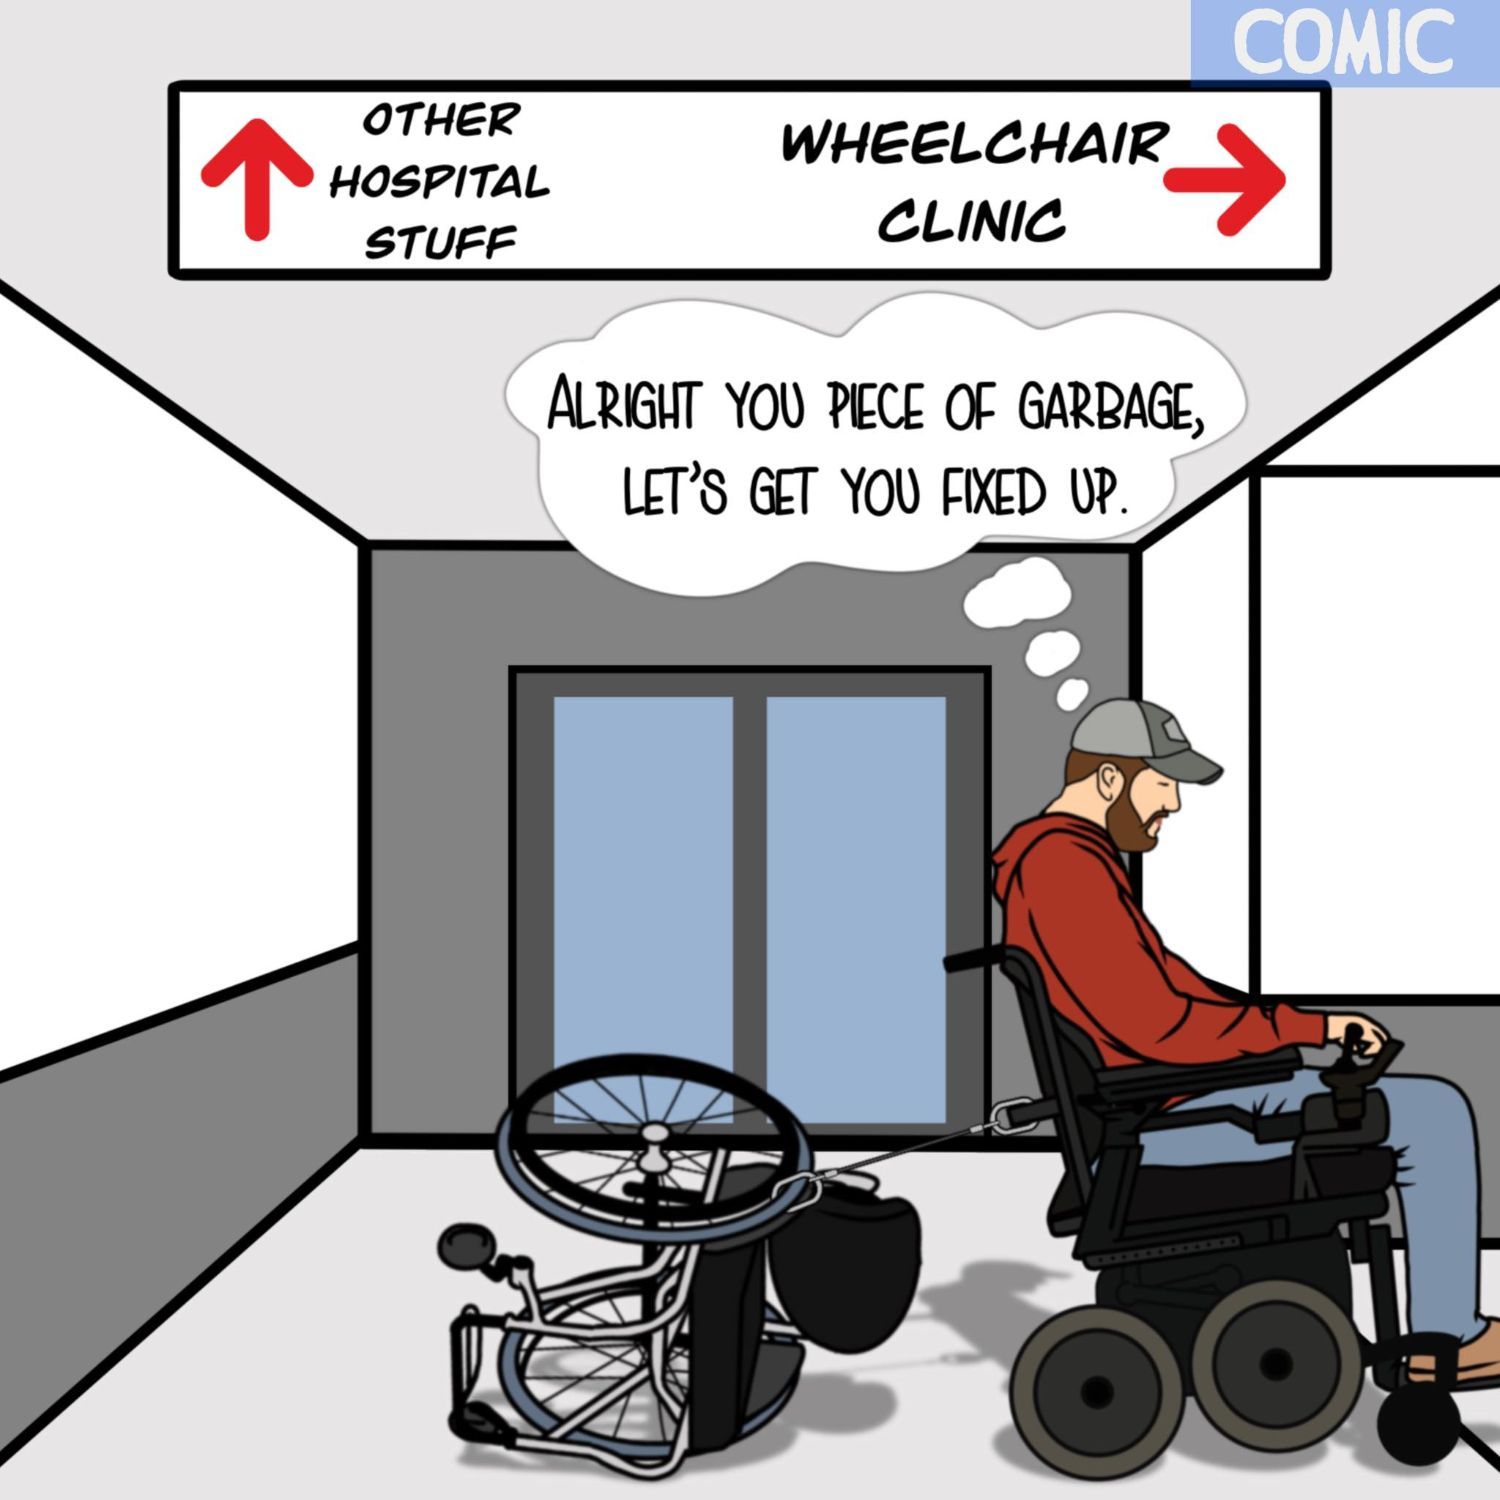 Image description: a man and a power chair dragging his manual chair behind him following a sign for wheelchair clinic.